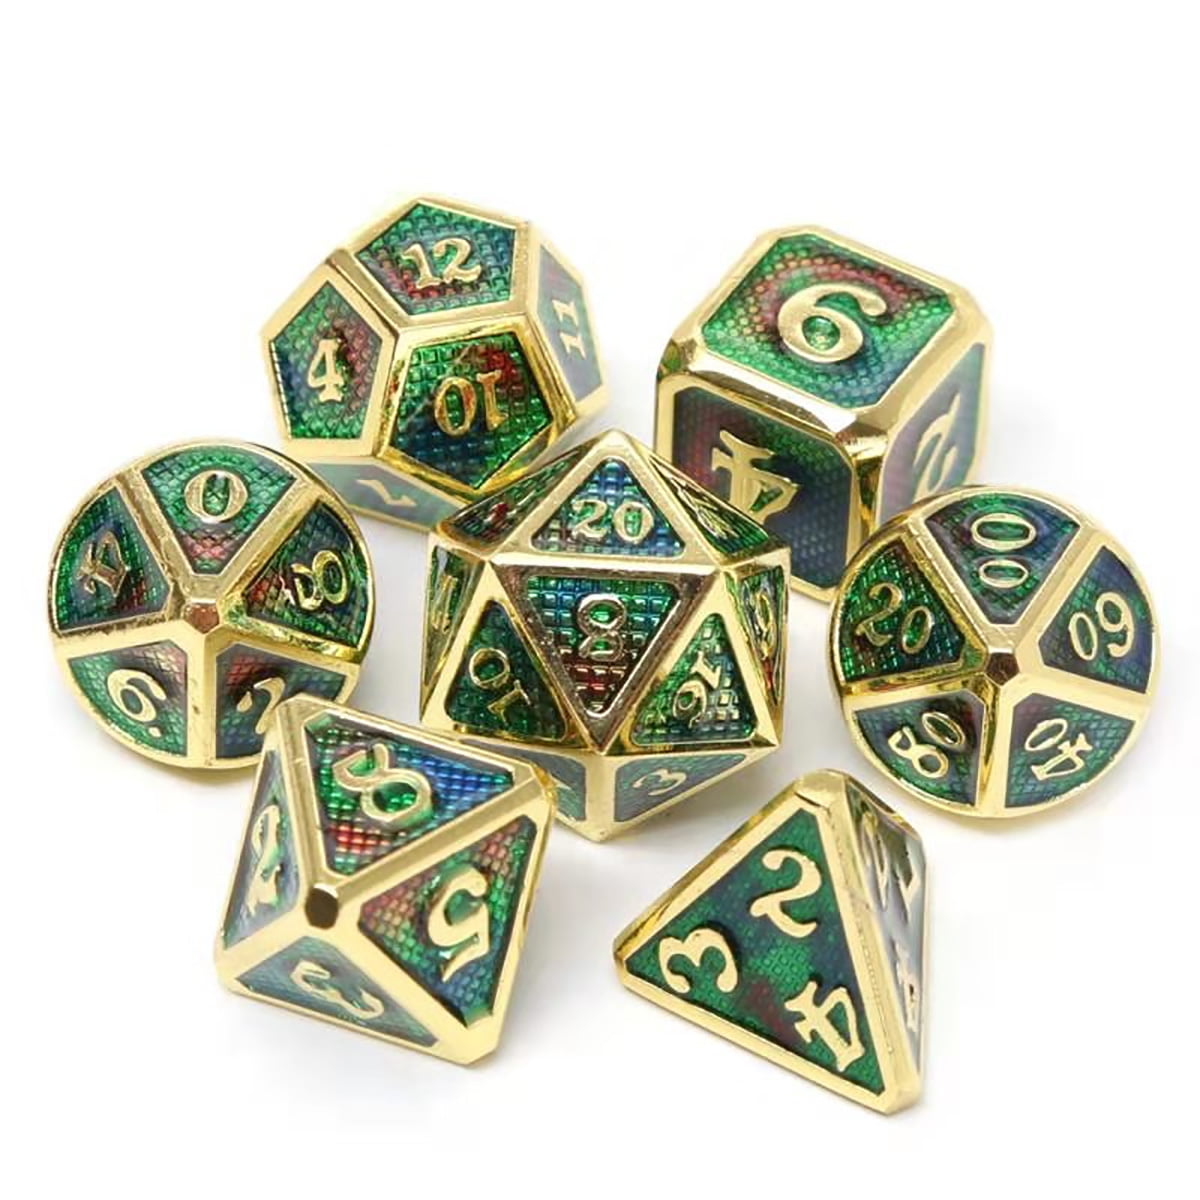 MagiDeal 7pcs/Set Polyhedral Dice Multi-sided for D&D RPG Party Game Toy #1